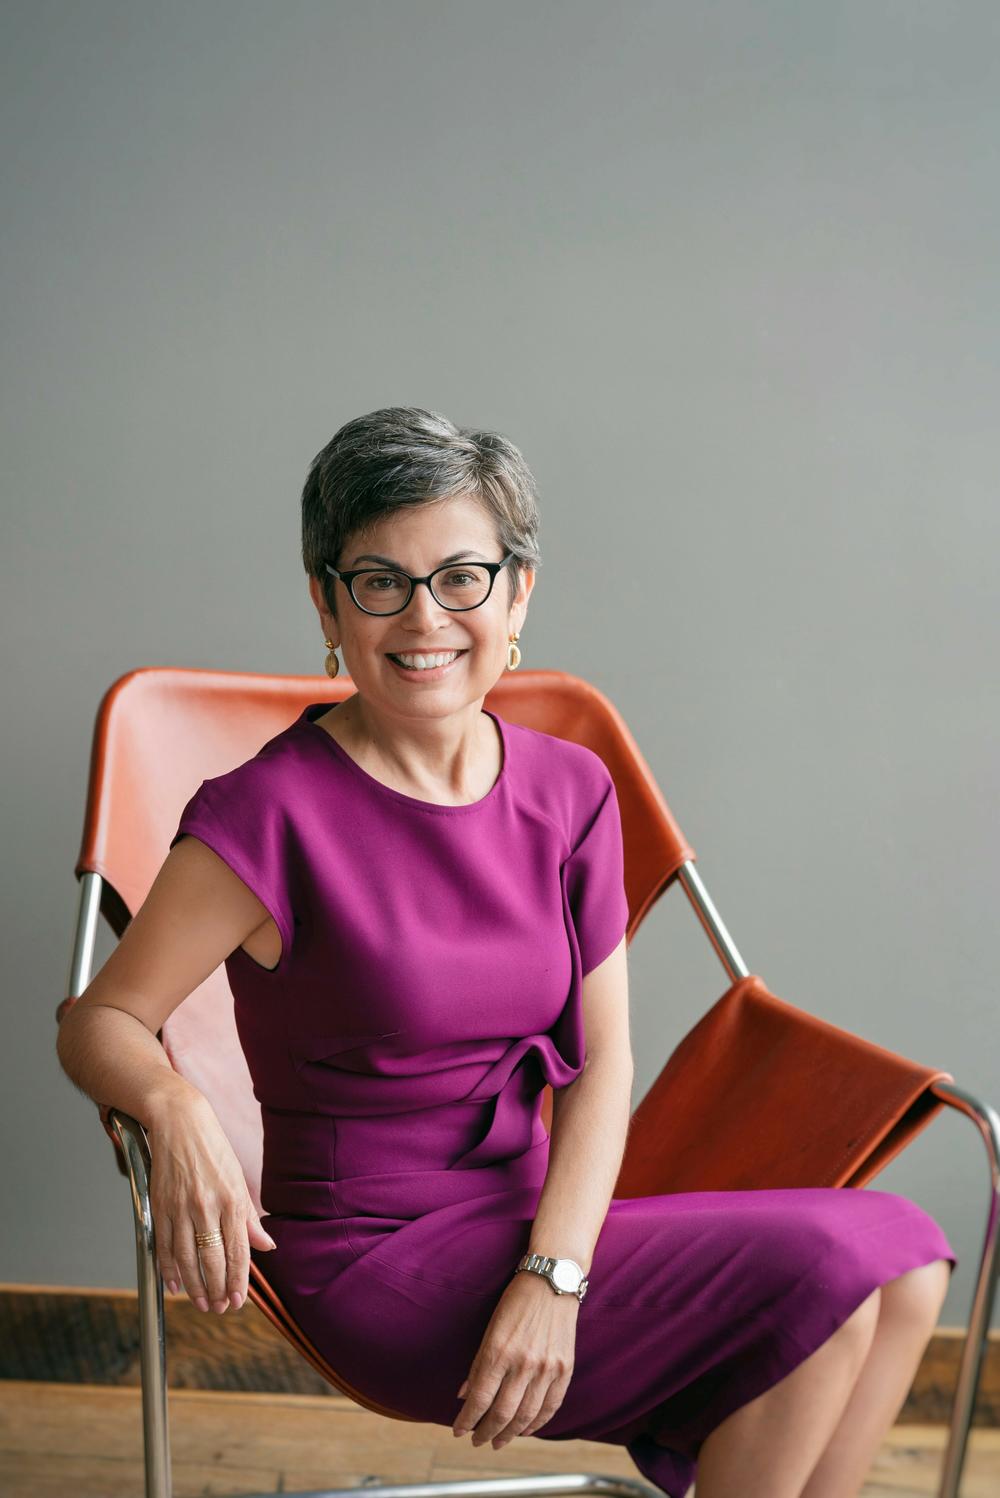 Teresa Huizar is chief executive officer of the Washington-based National Children's Alliance, an accrediting body for nearly 1,000 child advocacy centers across the U.S.